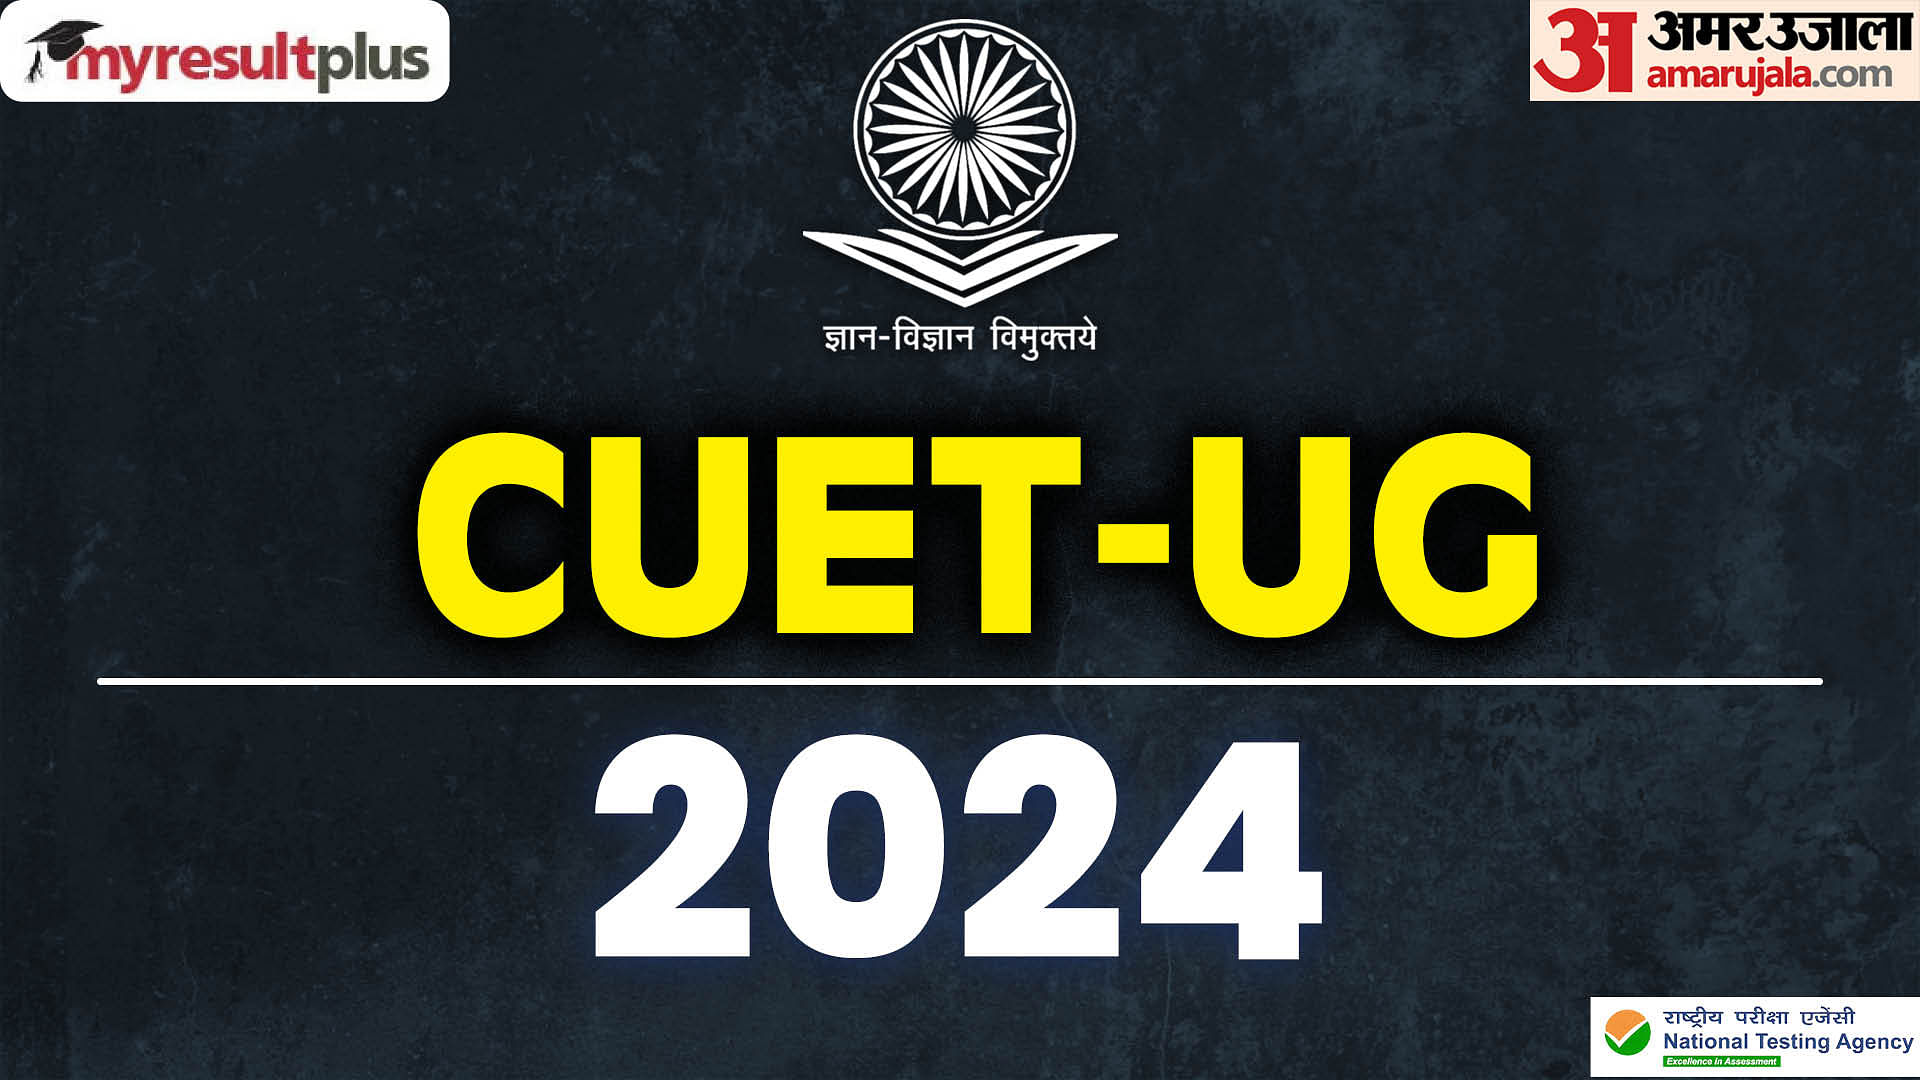 CUET UG Admit Card 2024 for Silchar, Delhi centers expected soon, Read more details here